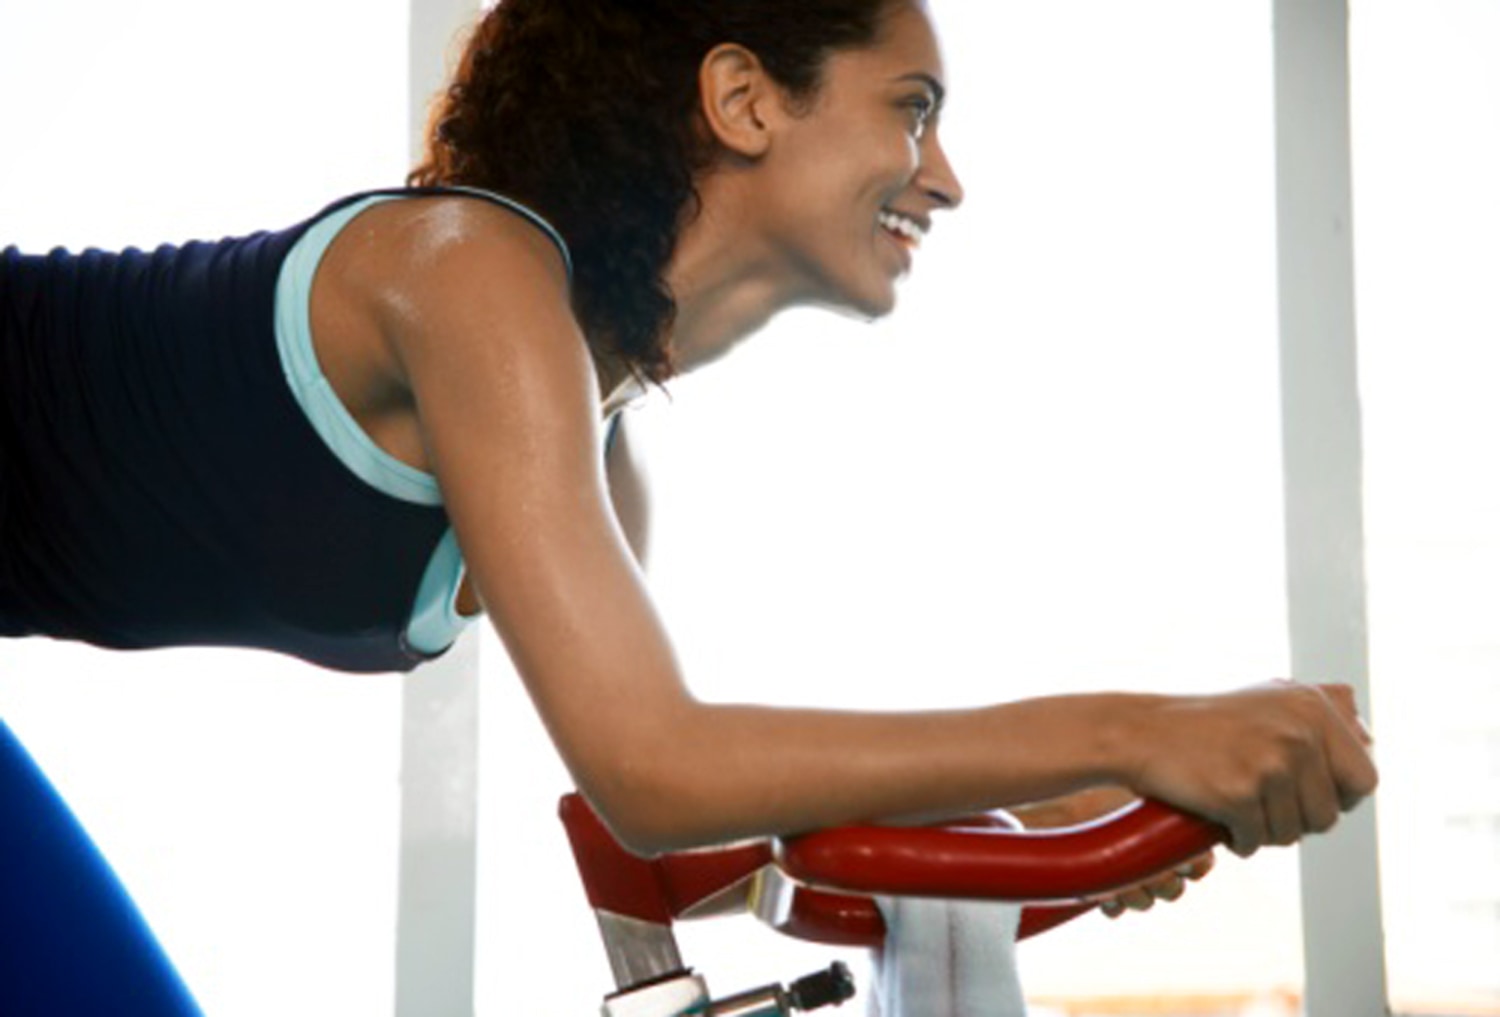 Fitness Training Reduces C-Section Risk - IDEA Health & Fitness Association